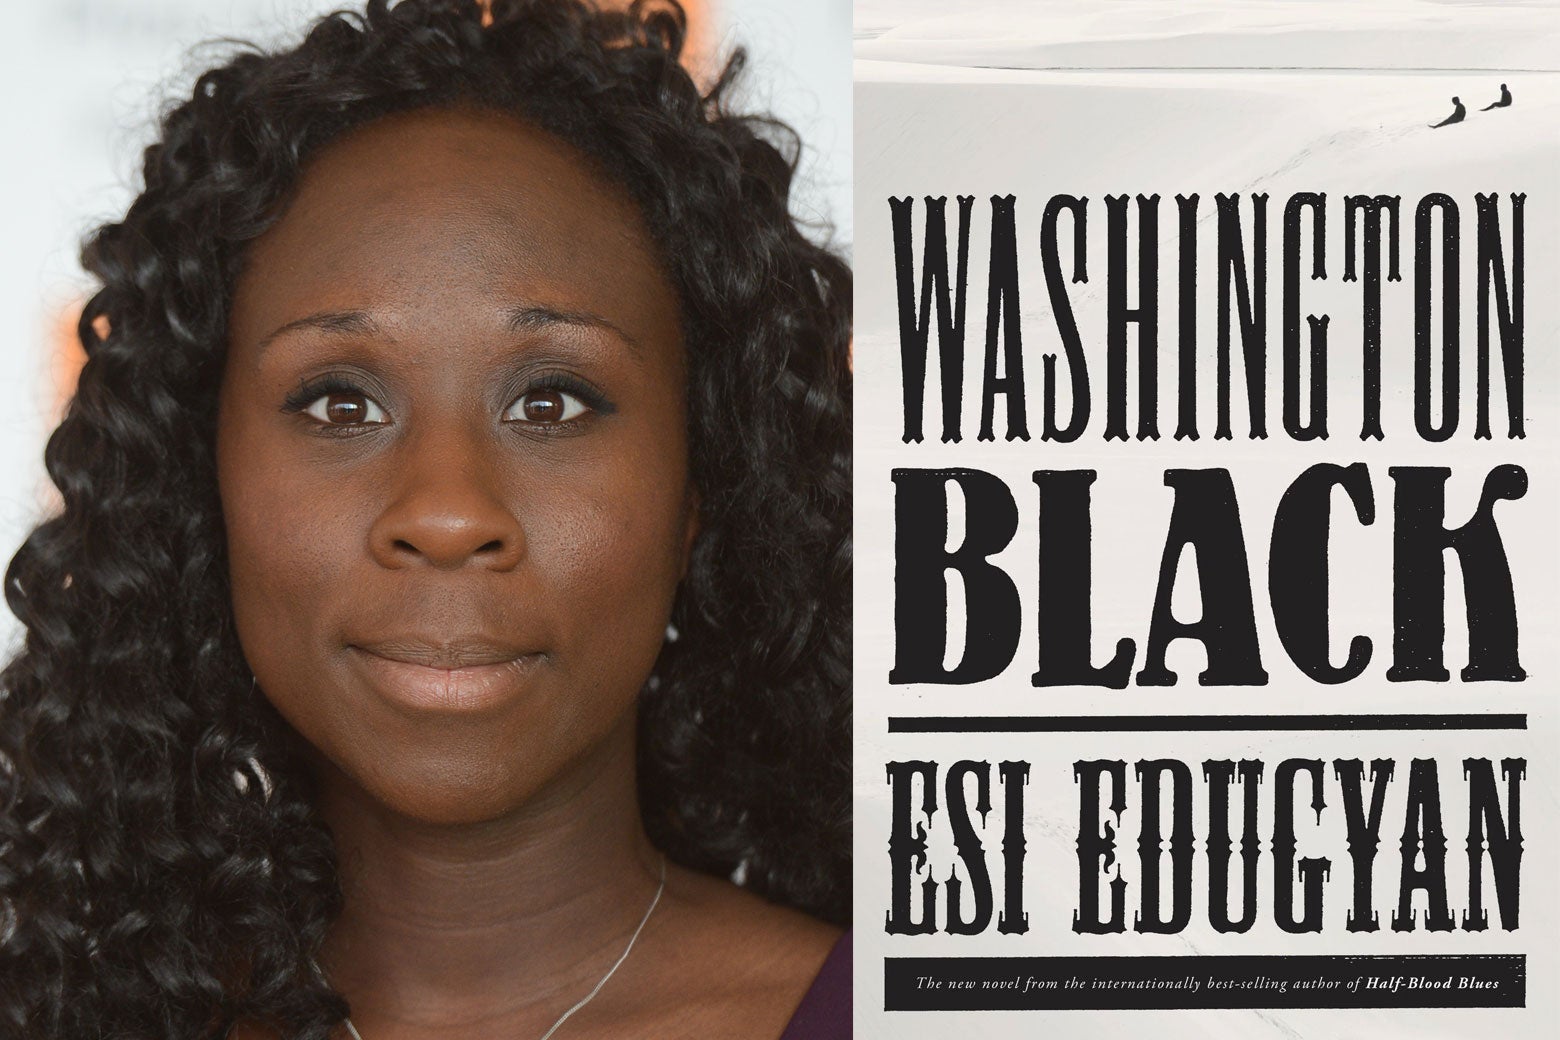 Esi Edugyan and the cover of her new book, Washington Black.